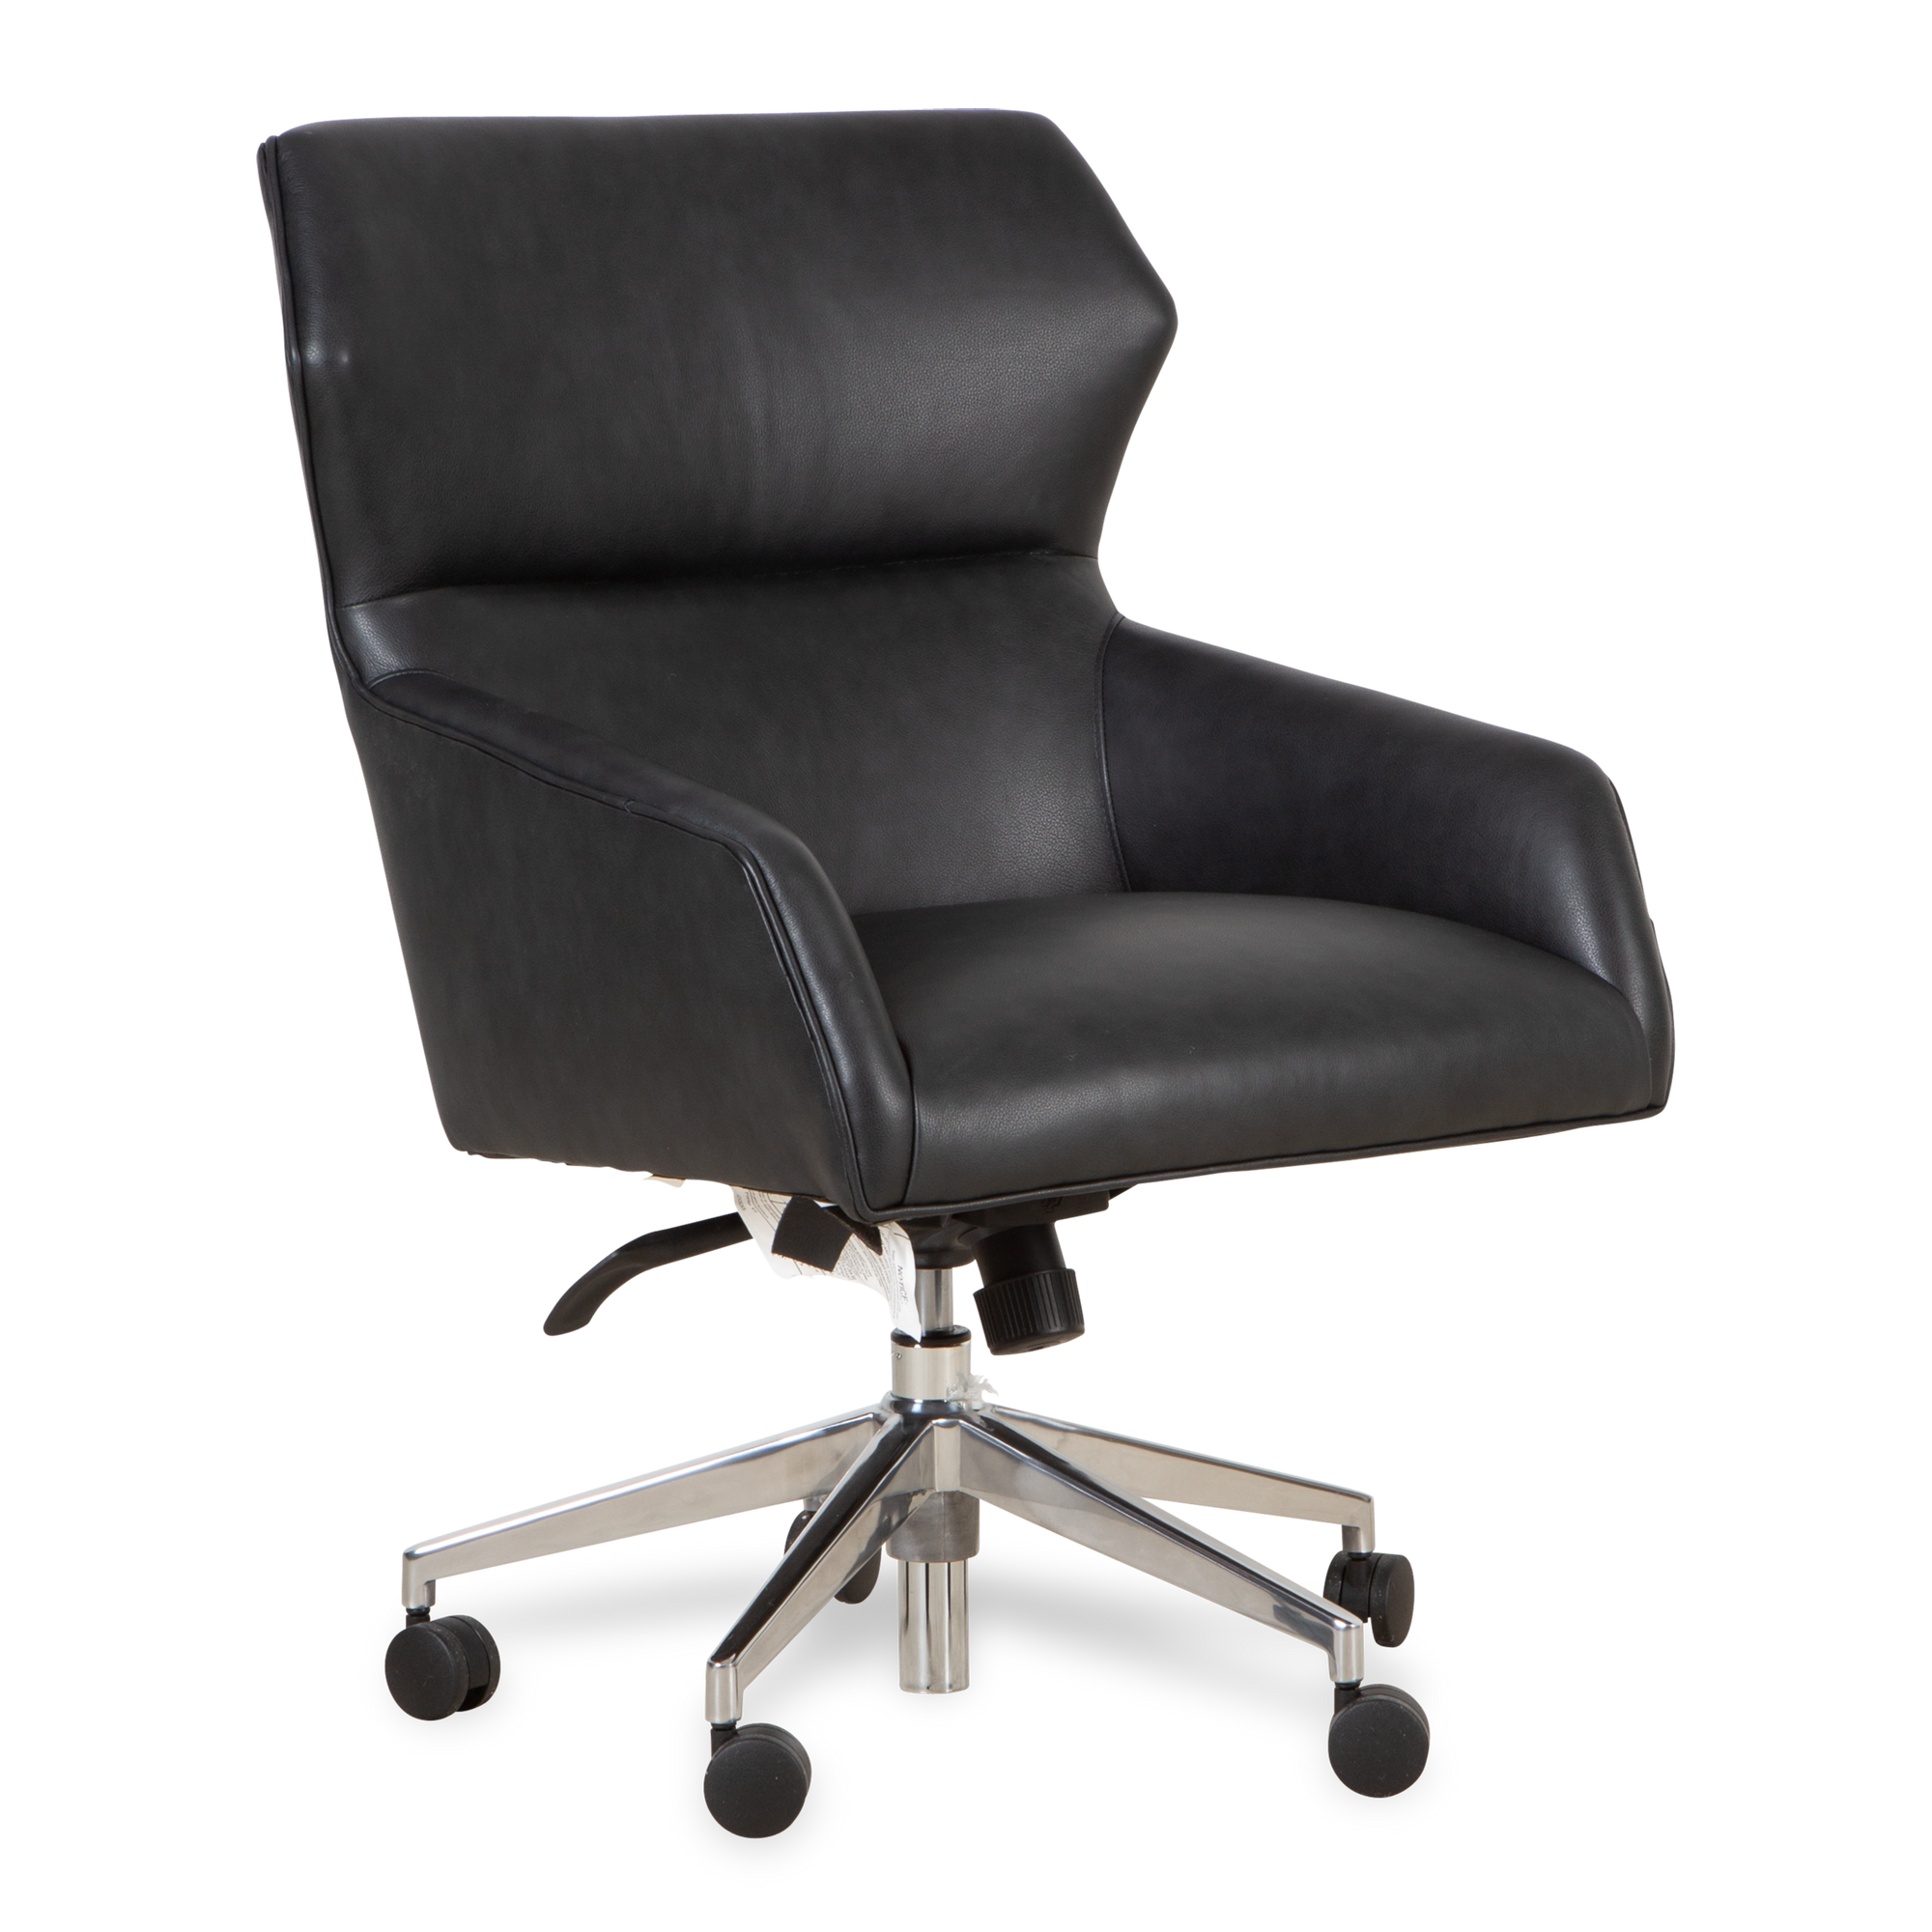 Add style and comfort to your office space with the Leon Leather Desk Chair.